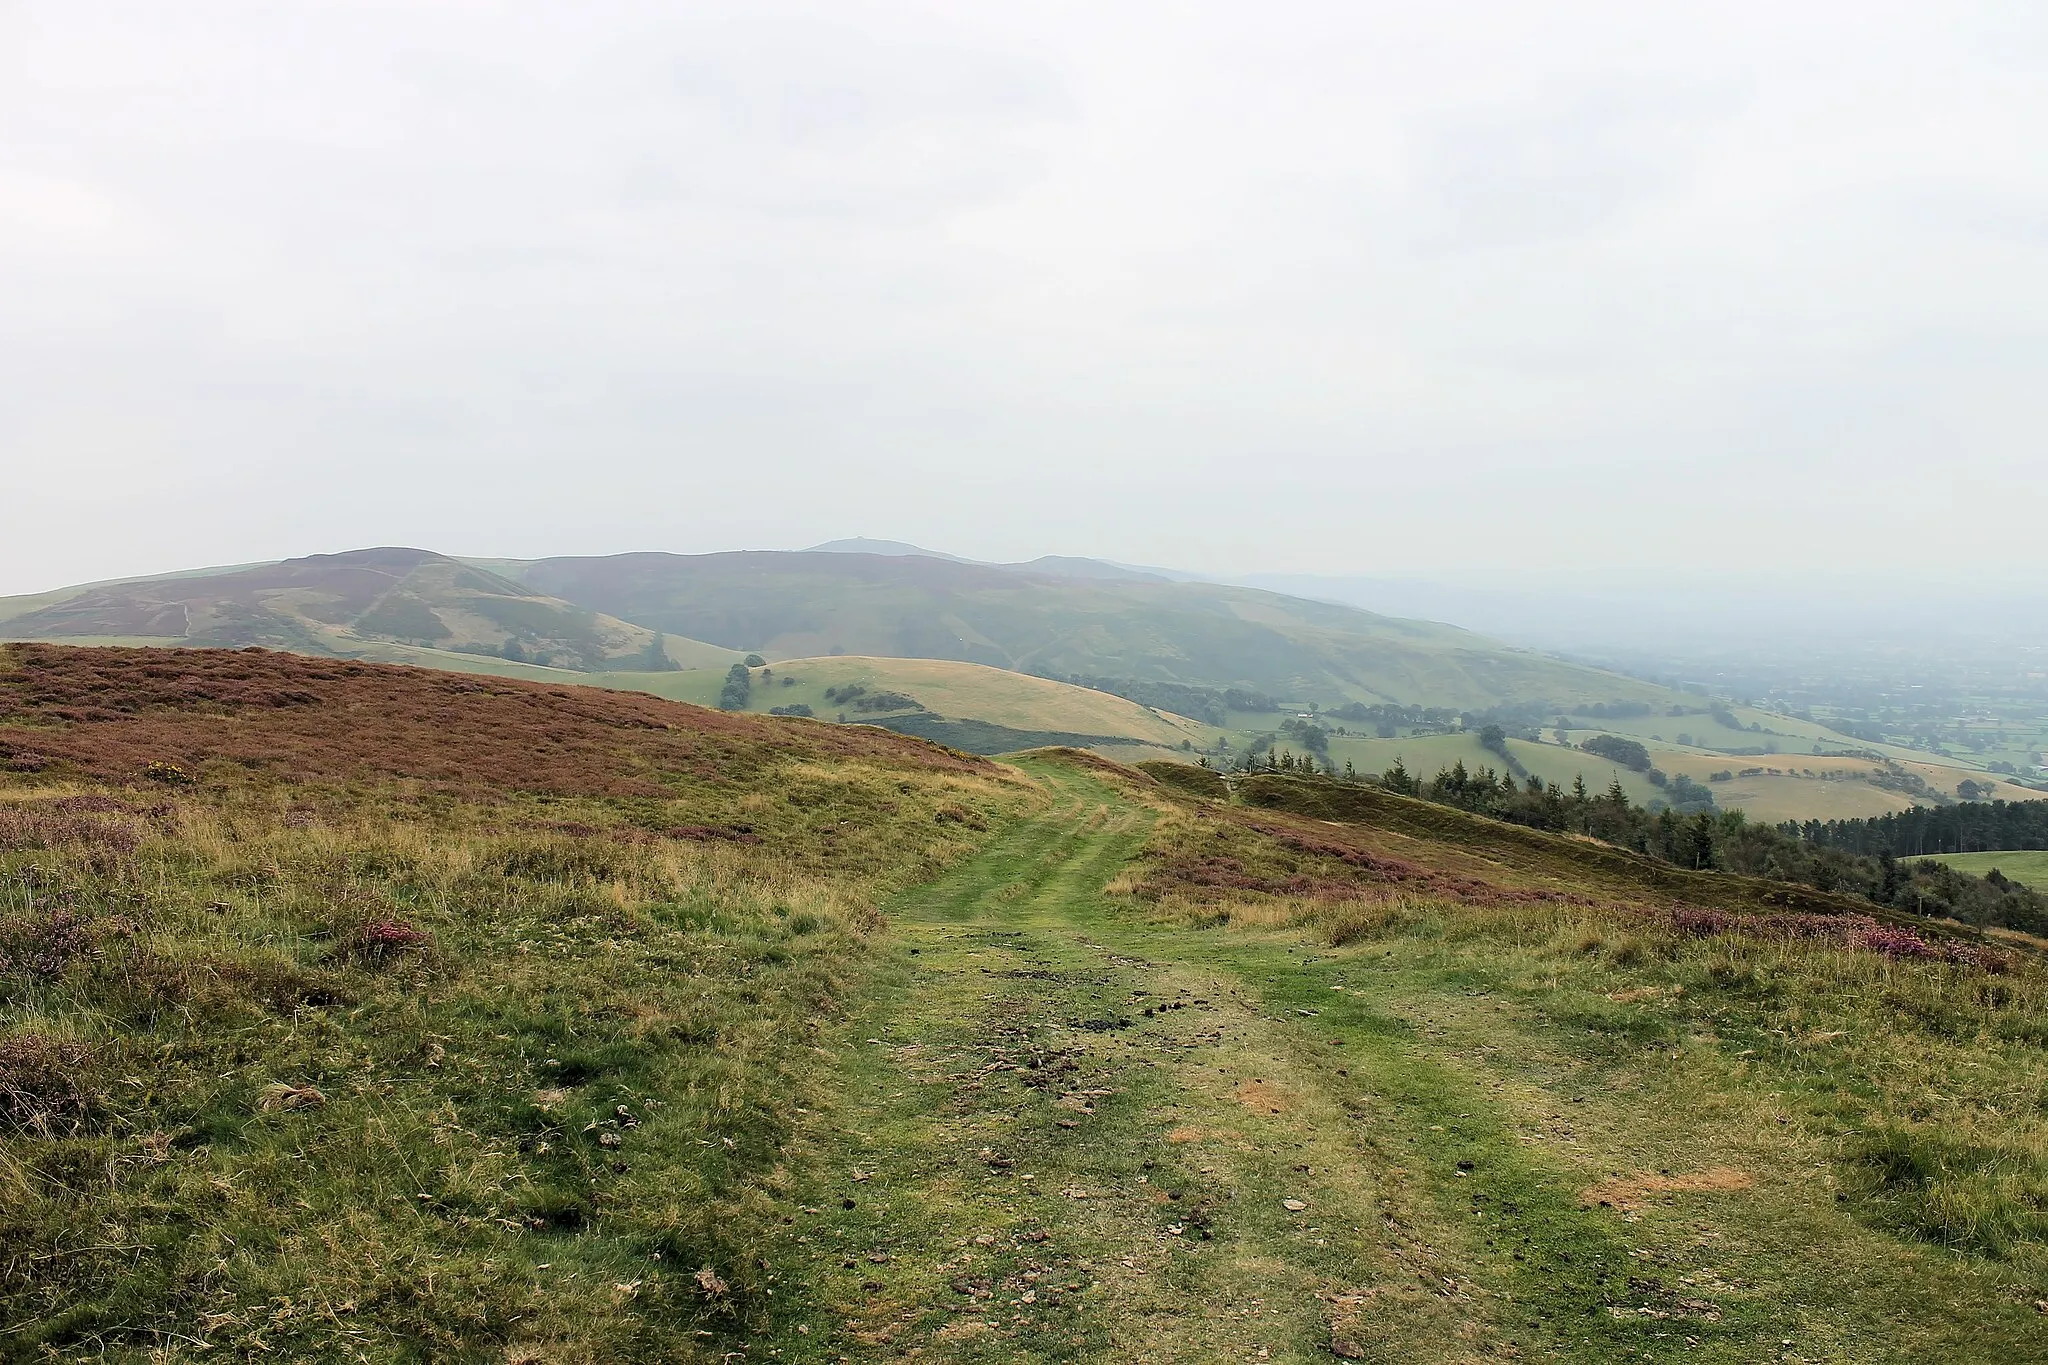 Photo showing: Middle of Penycloddiau Hill Fort, Clwydian Hills, North Wales. One of the largest hillforts in Wales, Penycloddiau is 21 hectares in area with its surrounding defneding ditches nearly 2 km in length.